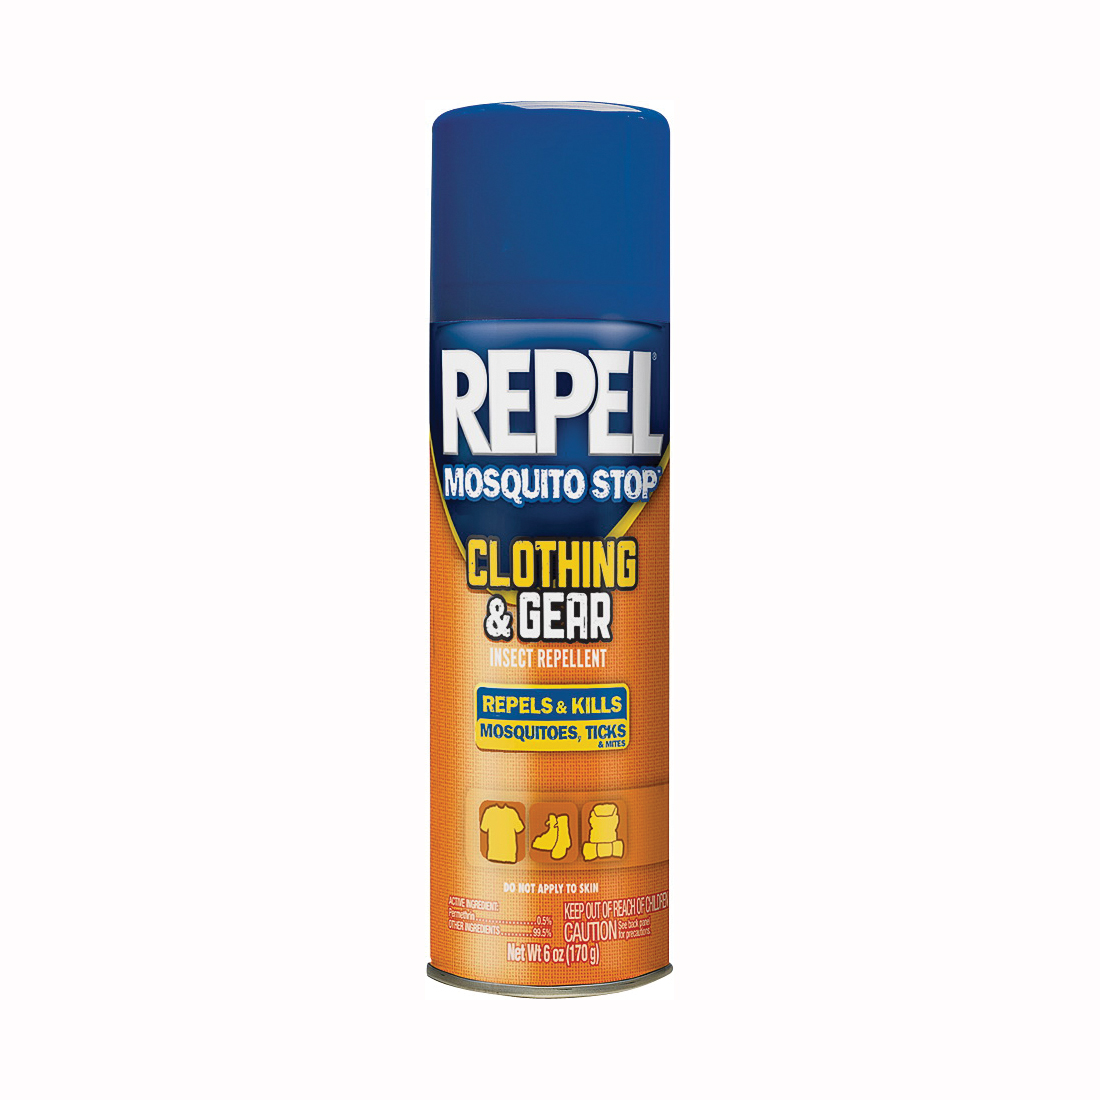 HG-94127 Insect Repellent, 6.5 oz, Aerosol Can, Liquid, Milky White, Aliphatic Solvent